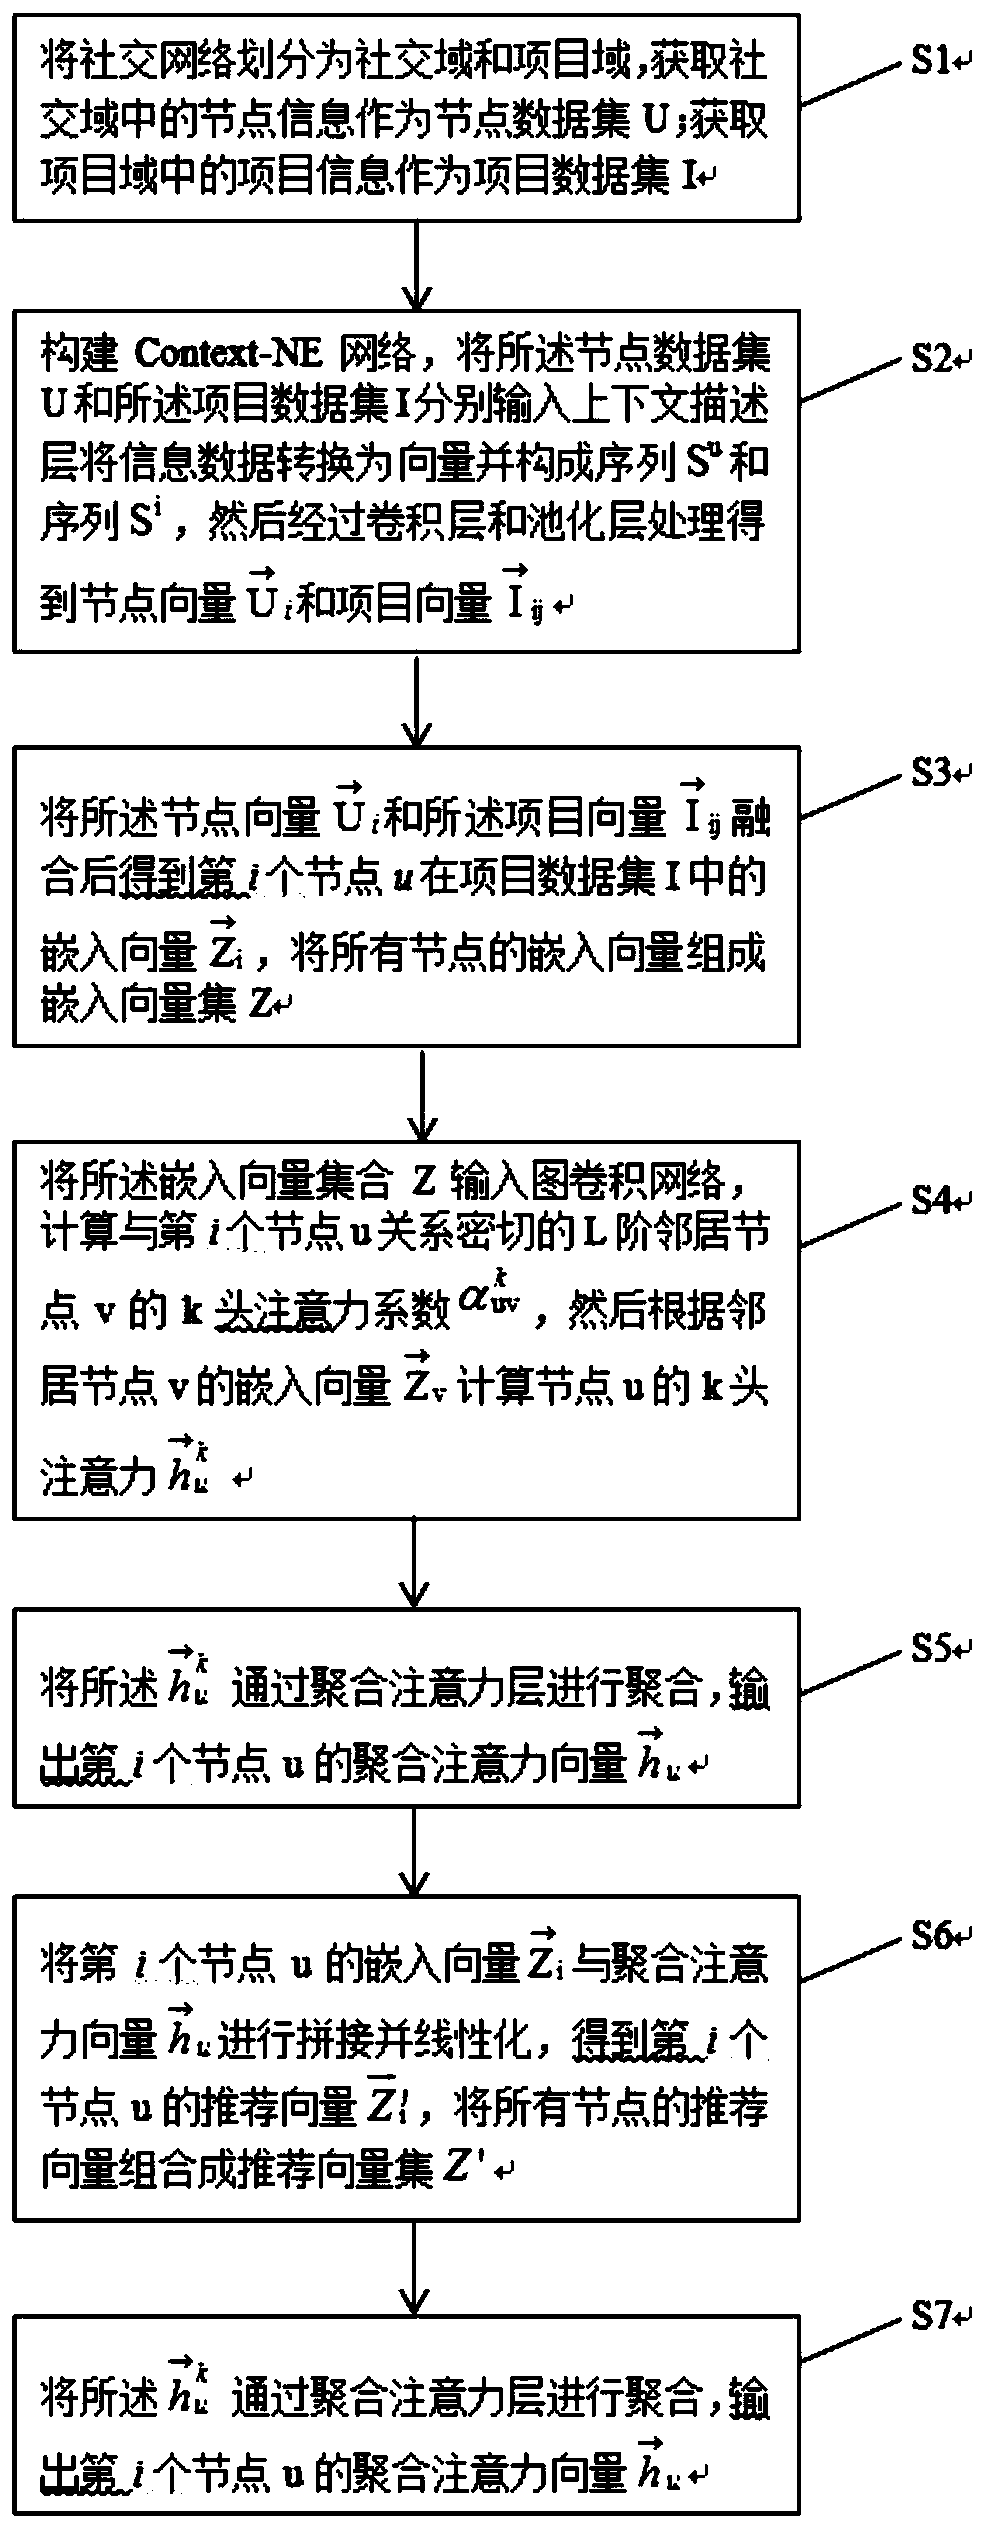 Recommendation method based on Mask mechanism and hierarchical attention mechanism